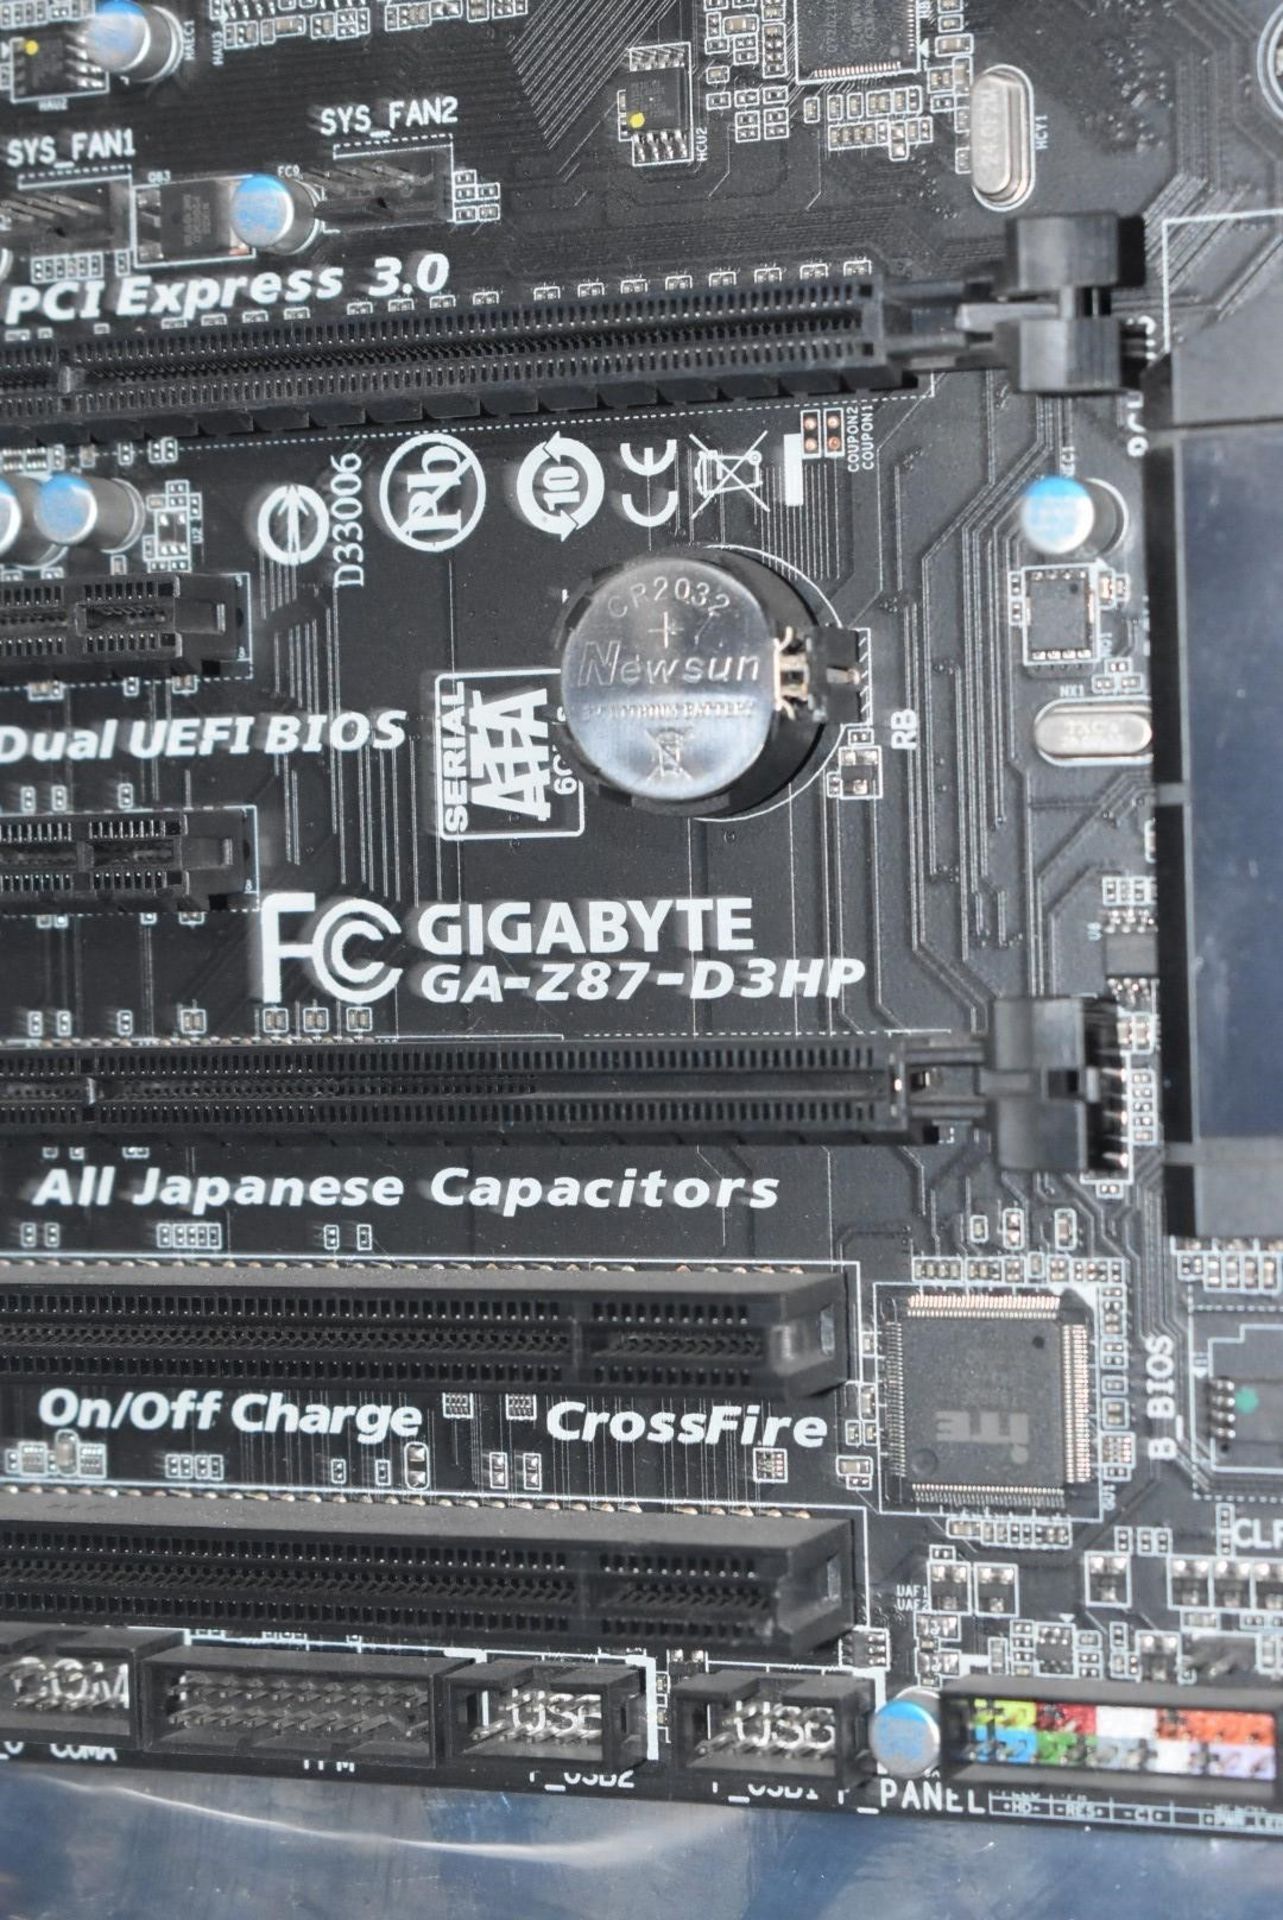 1 x Gigabyte GA-Z87-D3HP Motherboard With an Intel i5-4670k Processor and 4gb Ram - Image 2 of 4